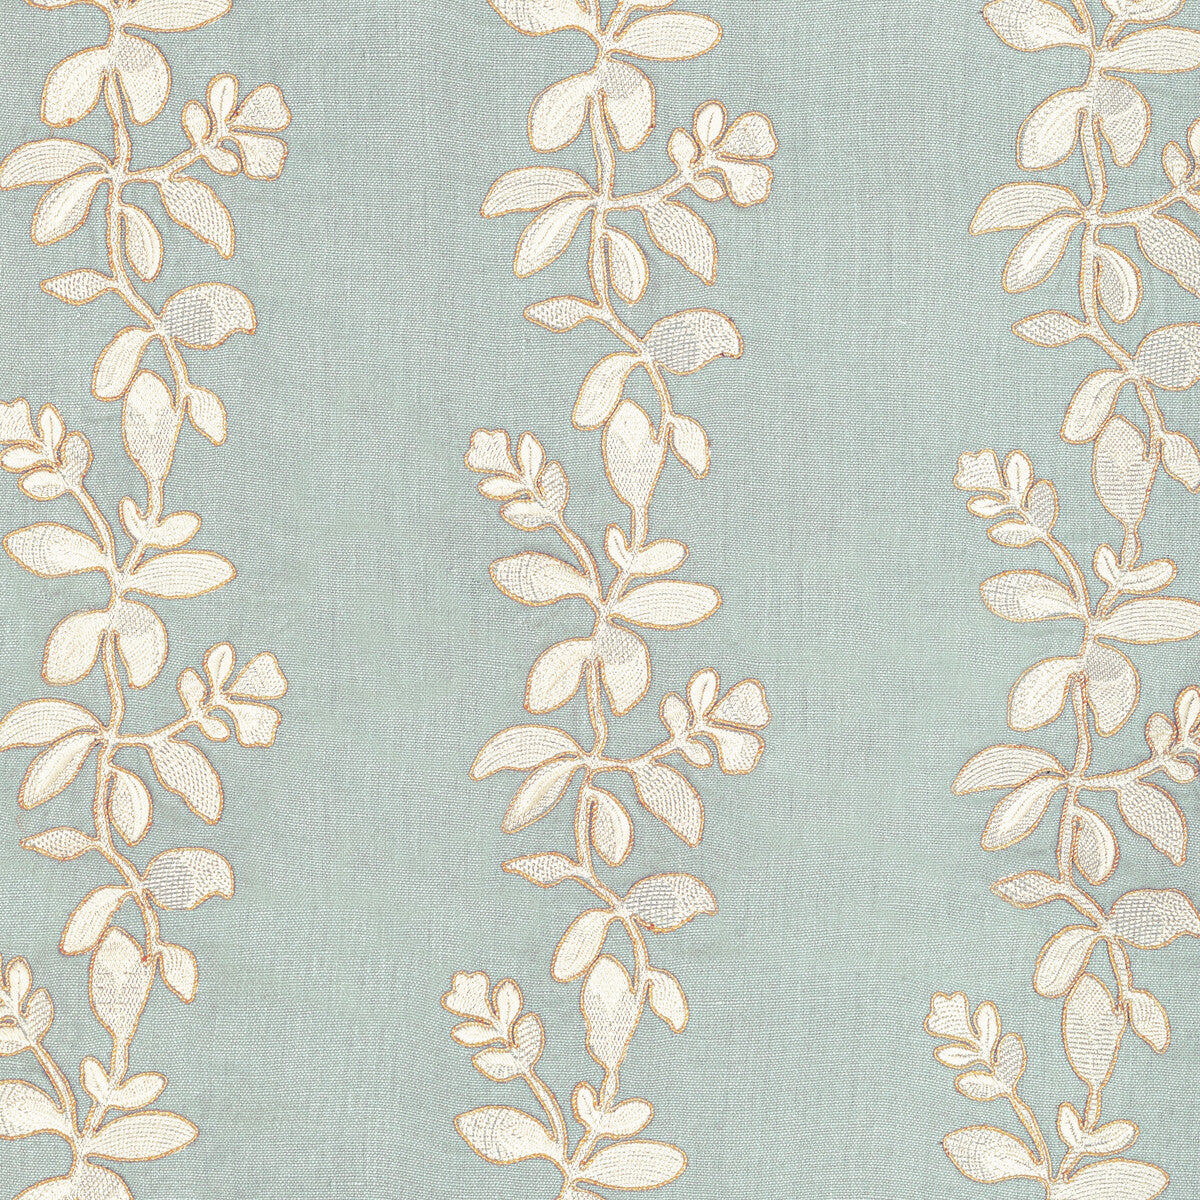 Gingerflower fabric in celeste color - pattern 36380.1615.0 - by Kravet Couture in the Barbara Barry Ojai collection